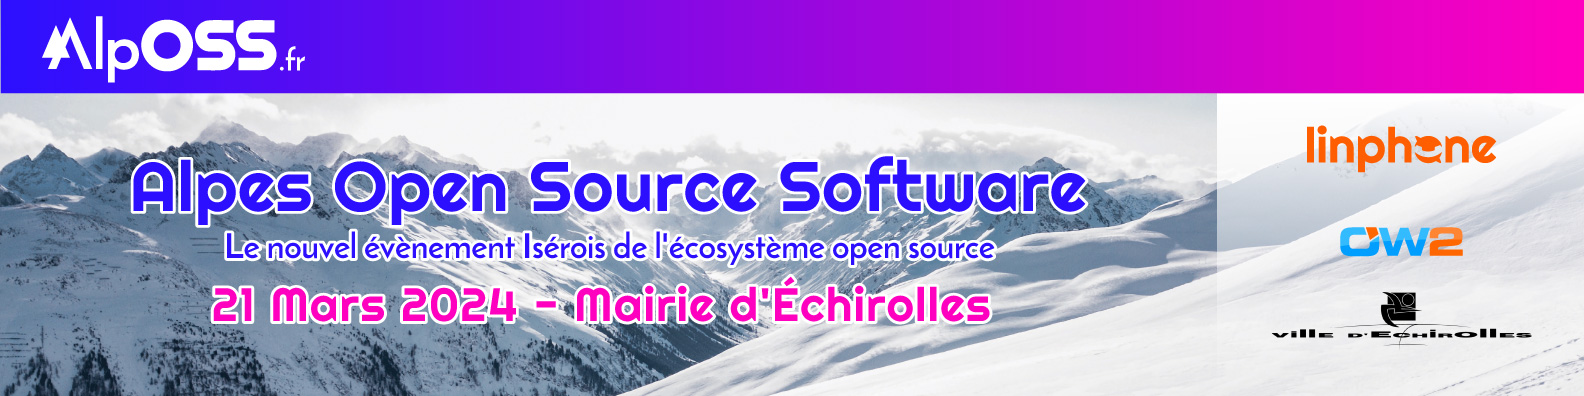 picture of a banner or logo from Alpes Open Source Software